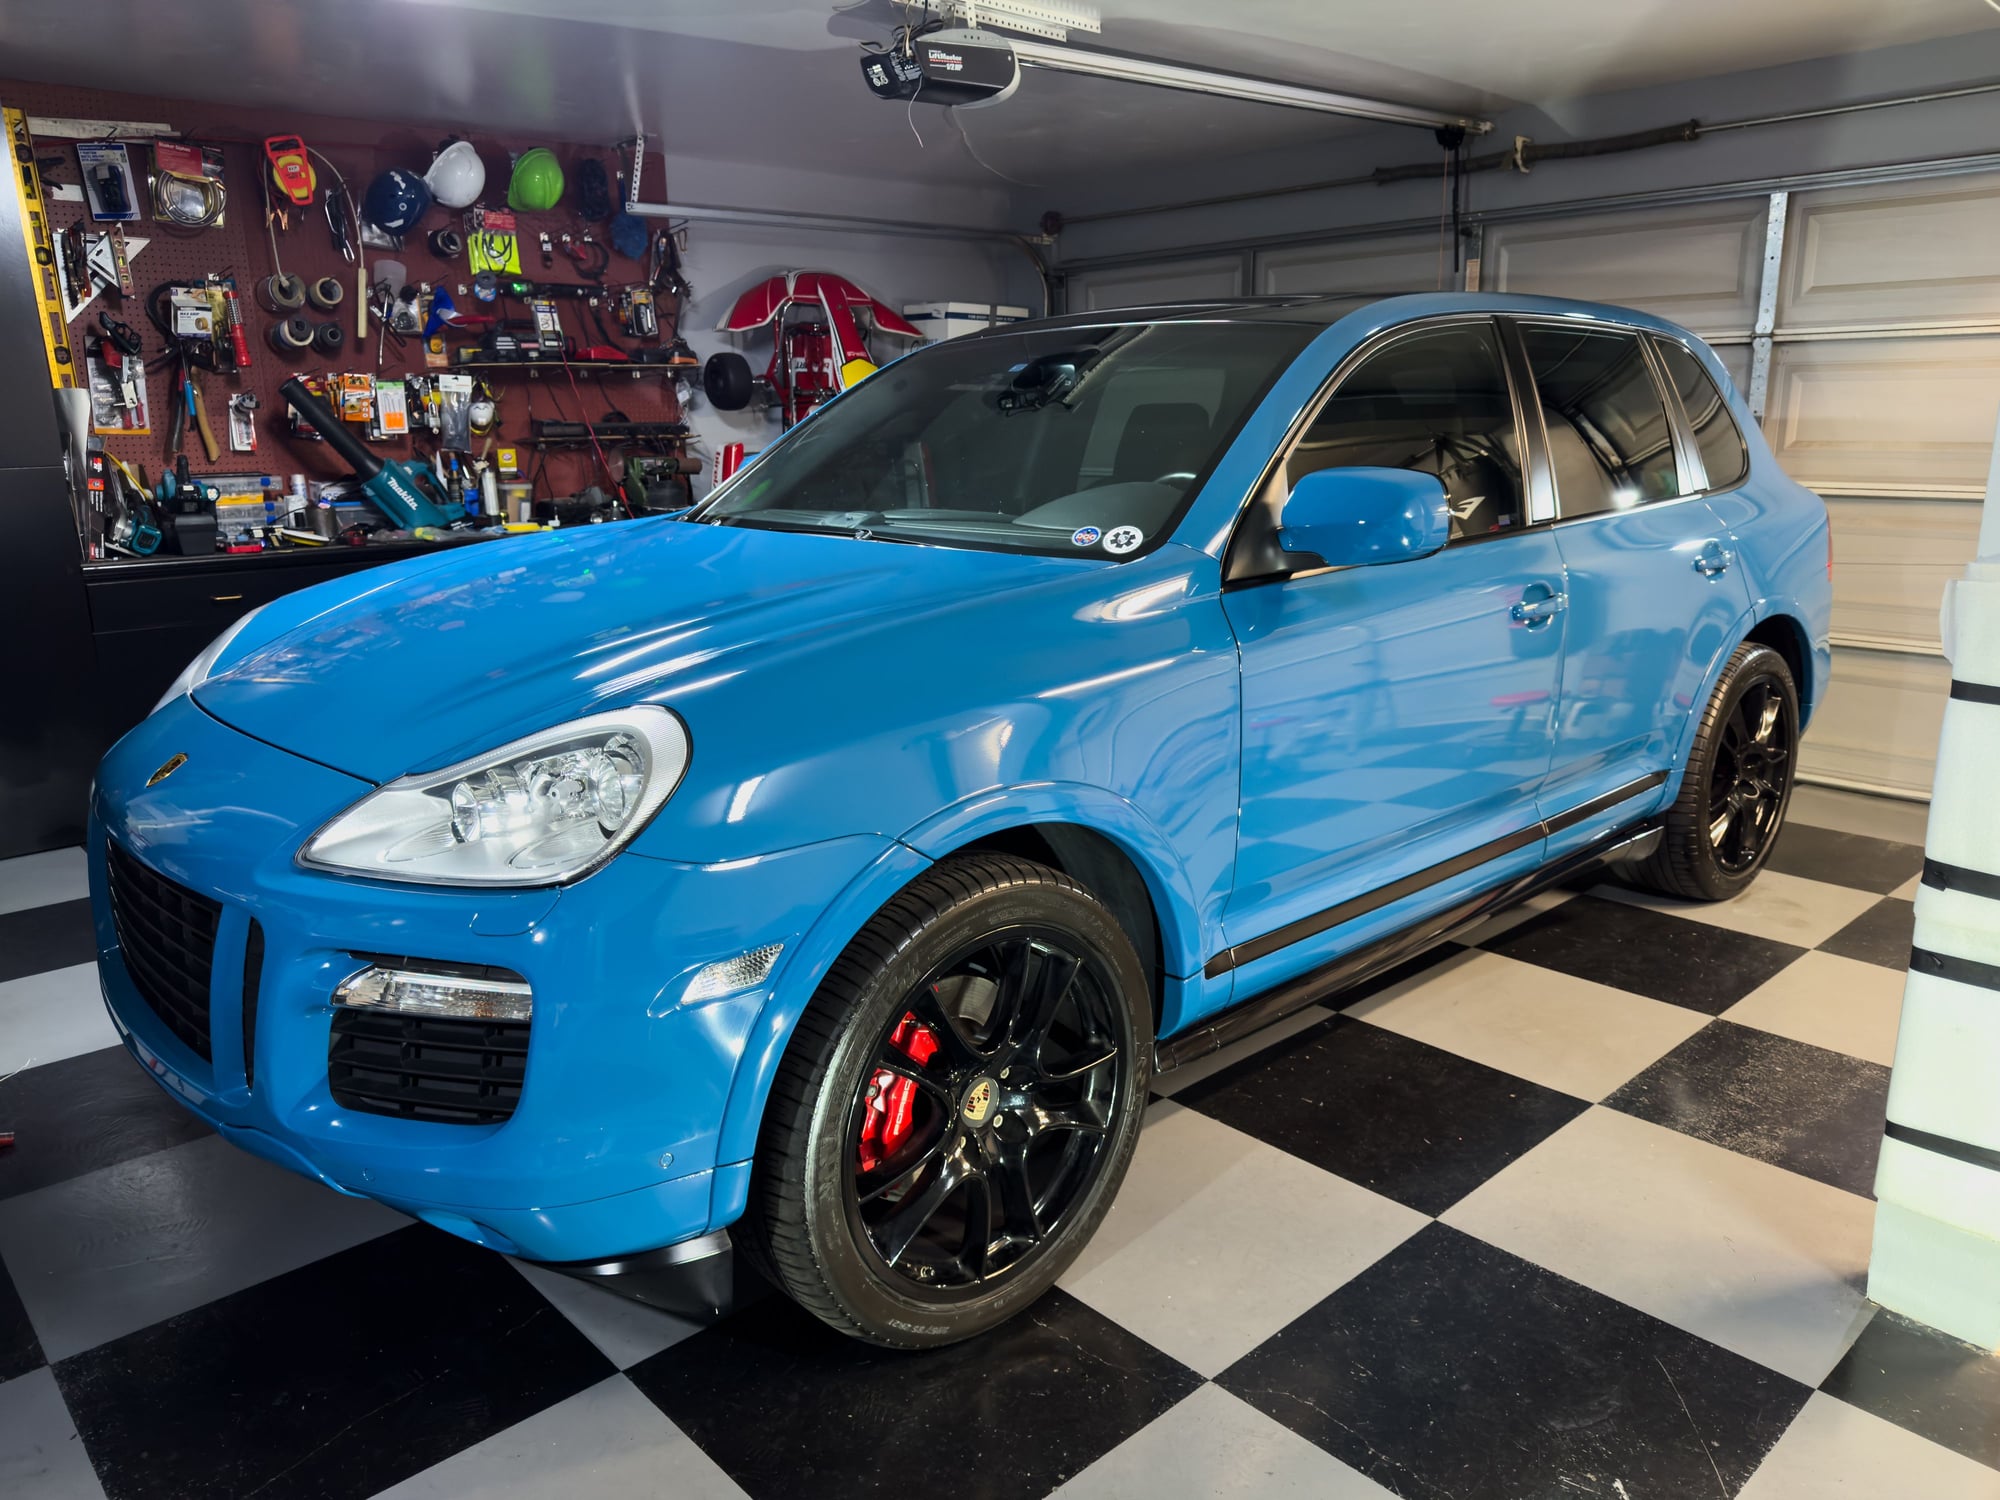 2010 Porsche Cayenne - 2010 Porsche Cayenne GTS Wrapped in Oslo Blue - Used - VIN WP1AD2AP8ALA61403 - 103,000 Miles - AWD - Automatic - SUV - Blue - Los Banos, CA 93635, United States